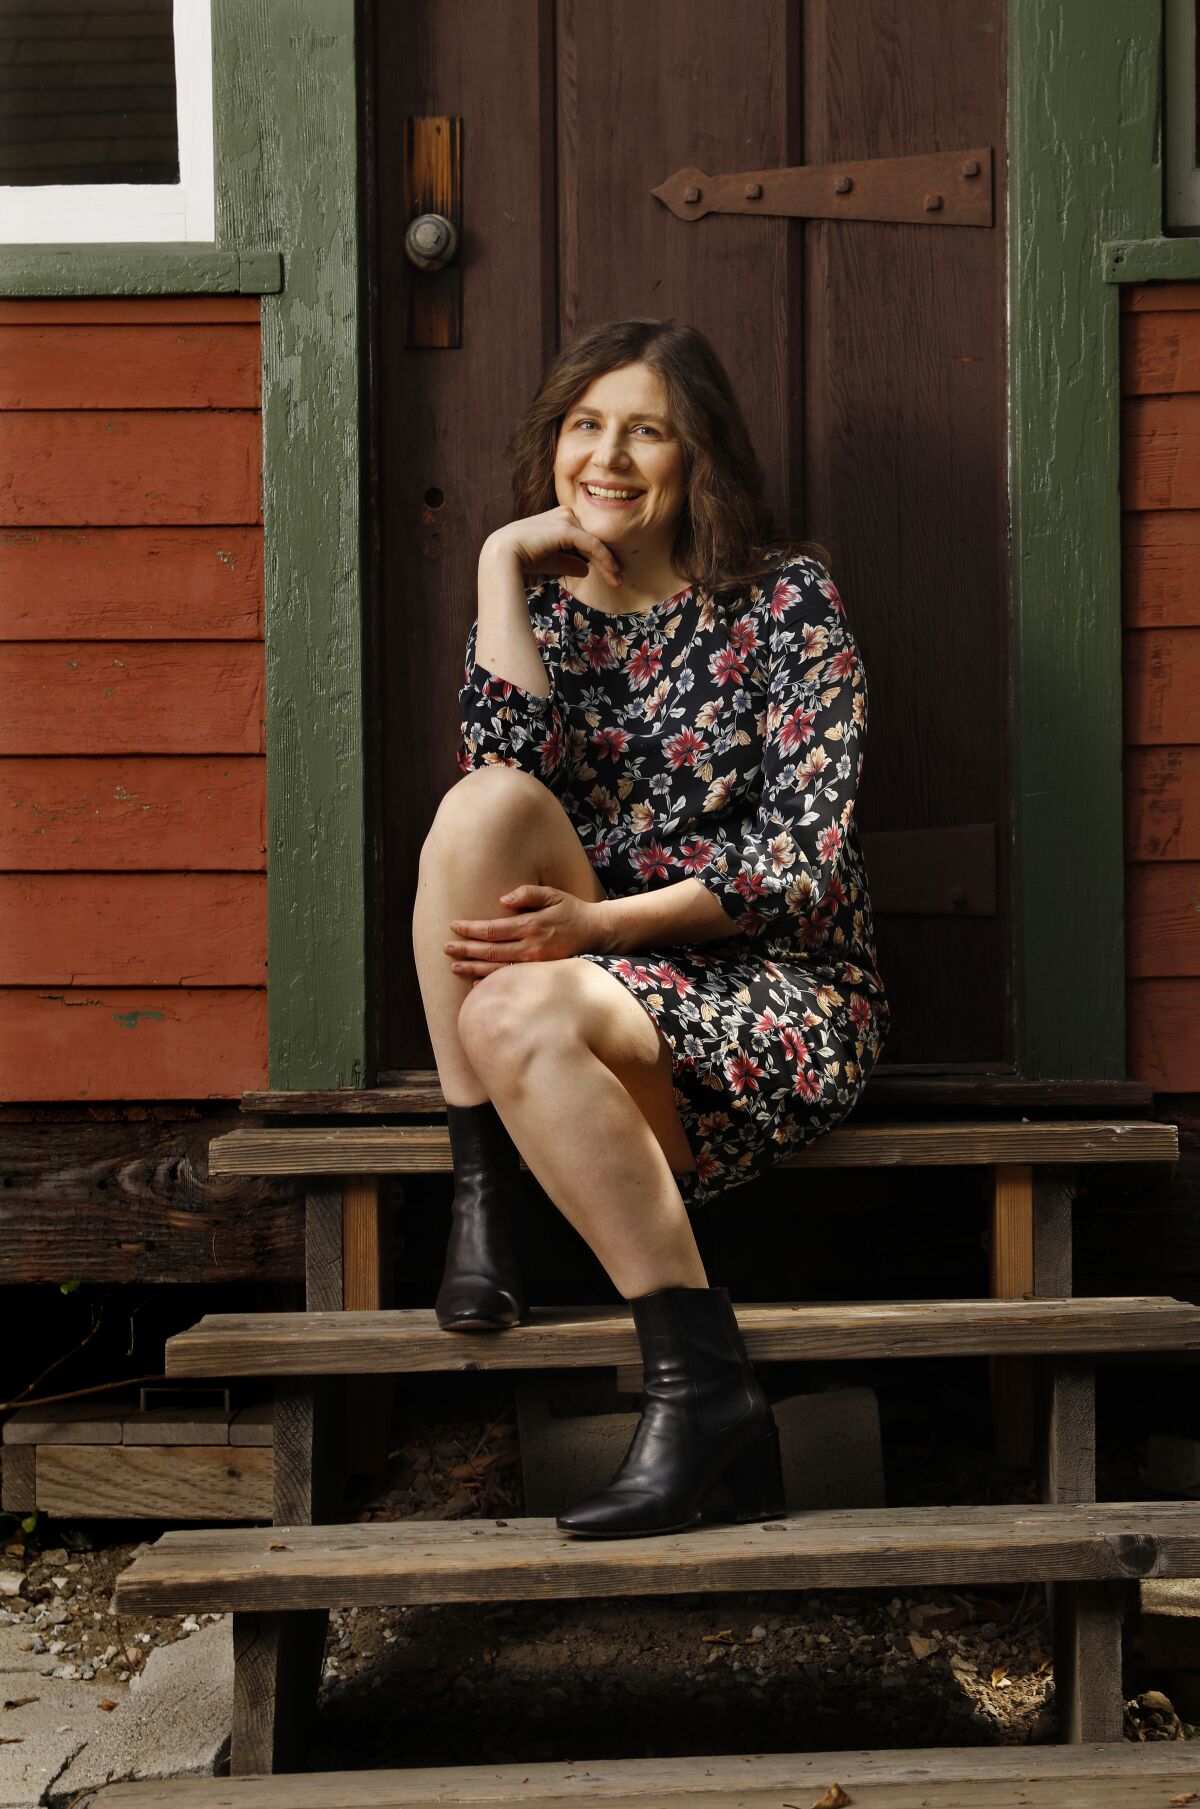  Alena Smith, showrunner of "Dickinson," sits on steps that lead to a door.  